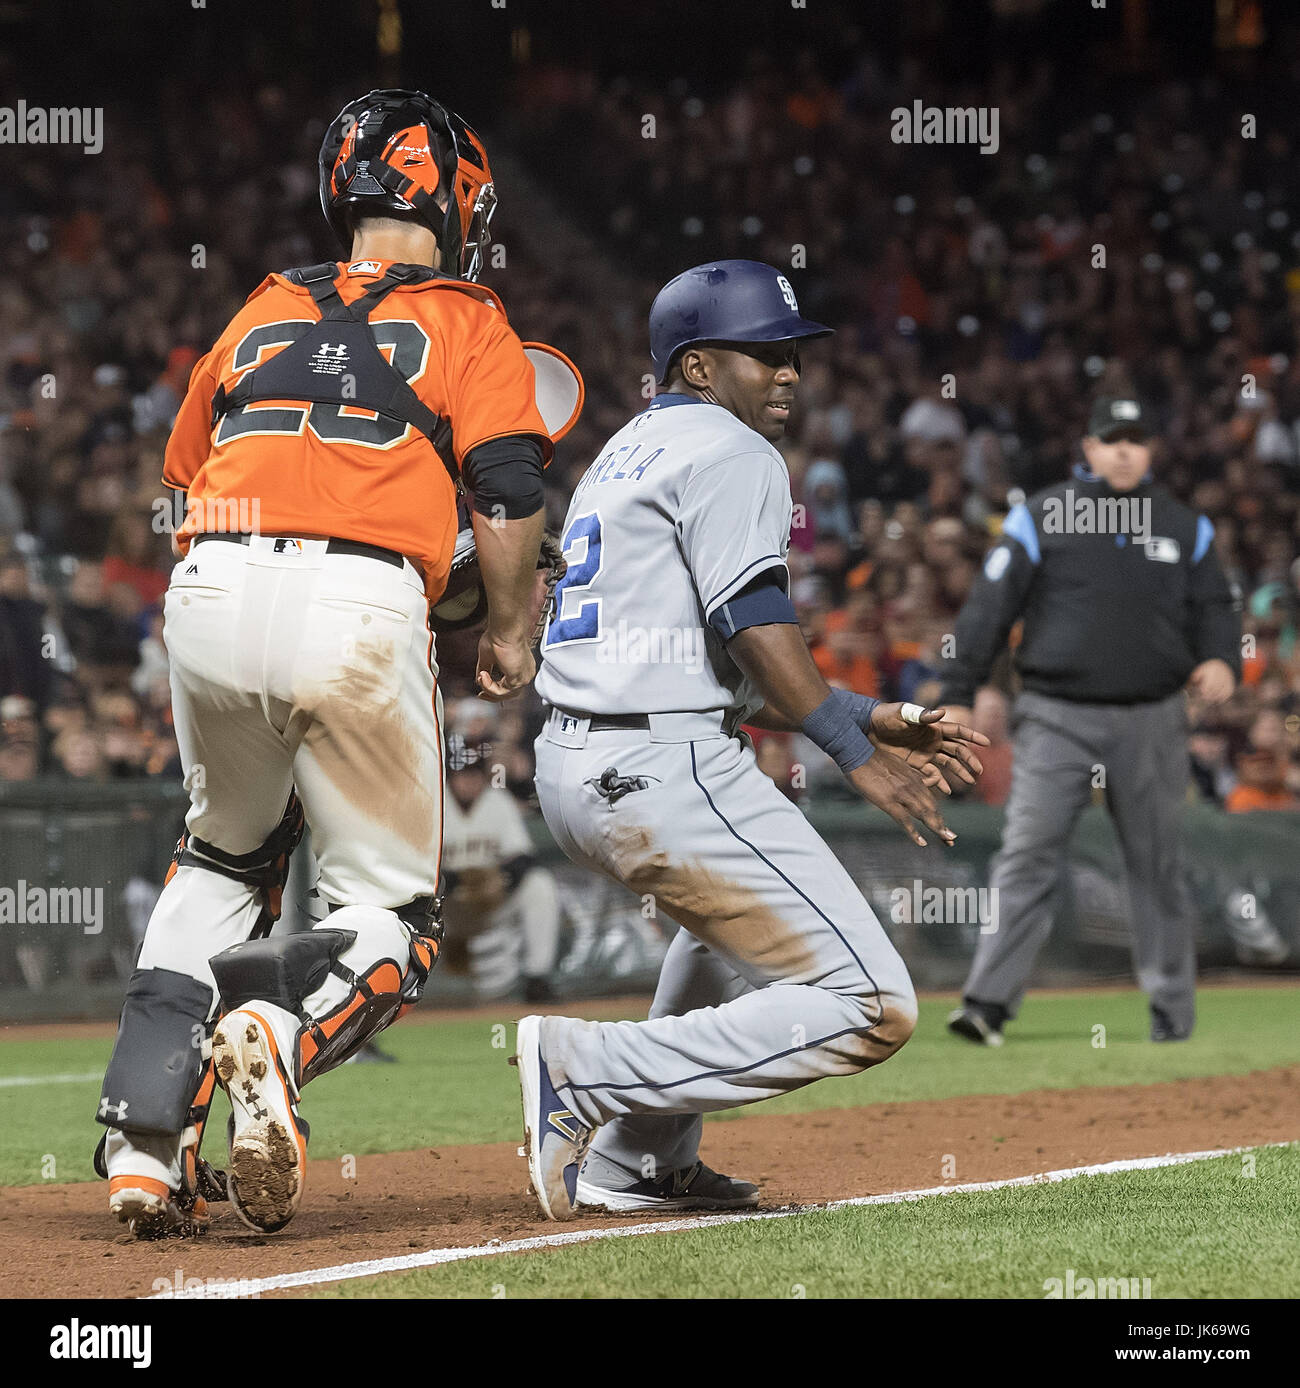 San Francisco, California, USA. 21st July, 2017. San Francisco Giants catcher Buster Posey (28) goes to put a tag on San Diego Padres second baseman Jose Pirela (2), during a MLB game between the San Diego Padres and the San Francisco Giants at AT&T Park in San Francisco, California. Valerie Shoaps/CSM/Alamy Live News Stock Photo